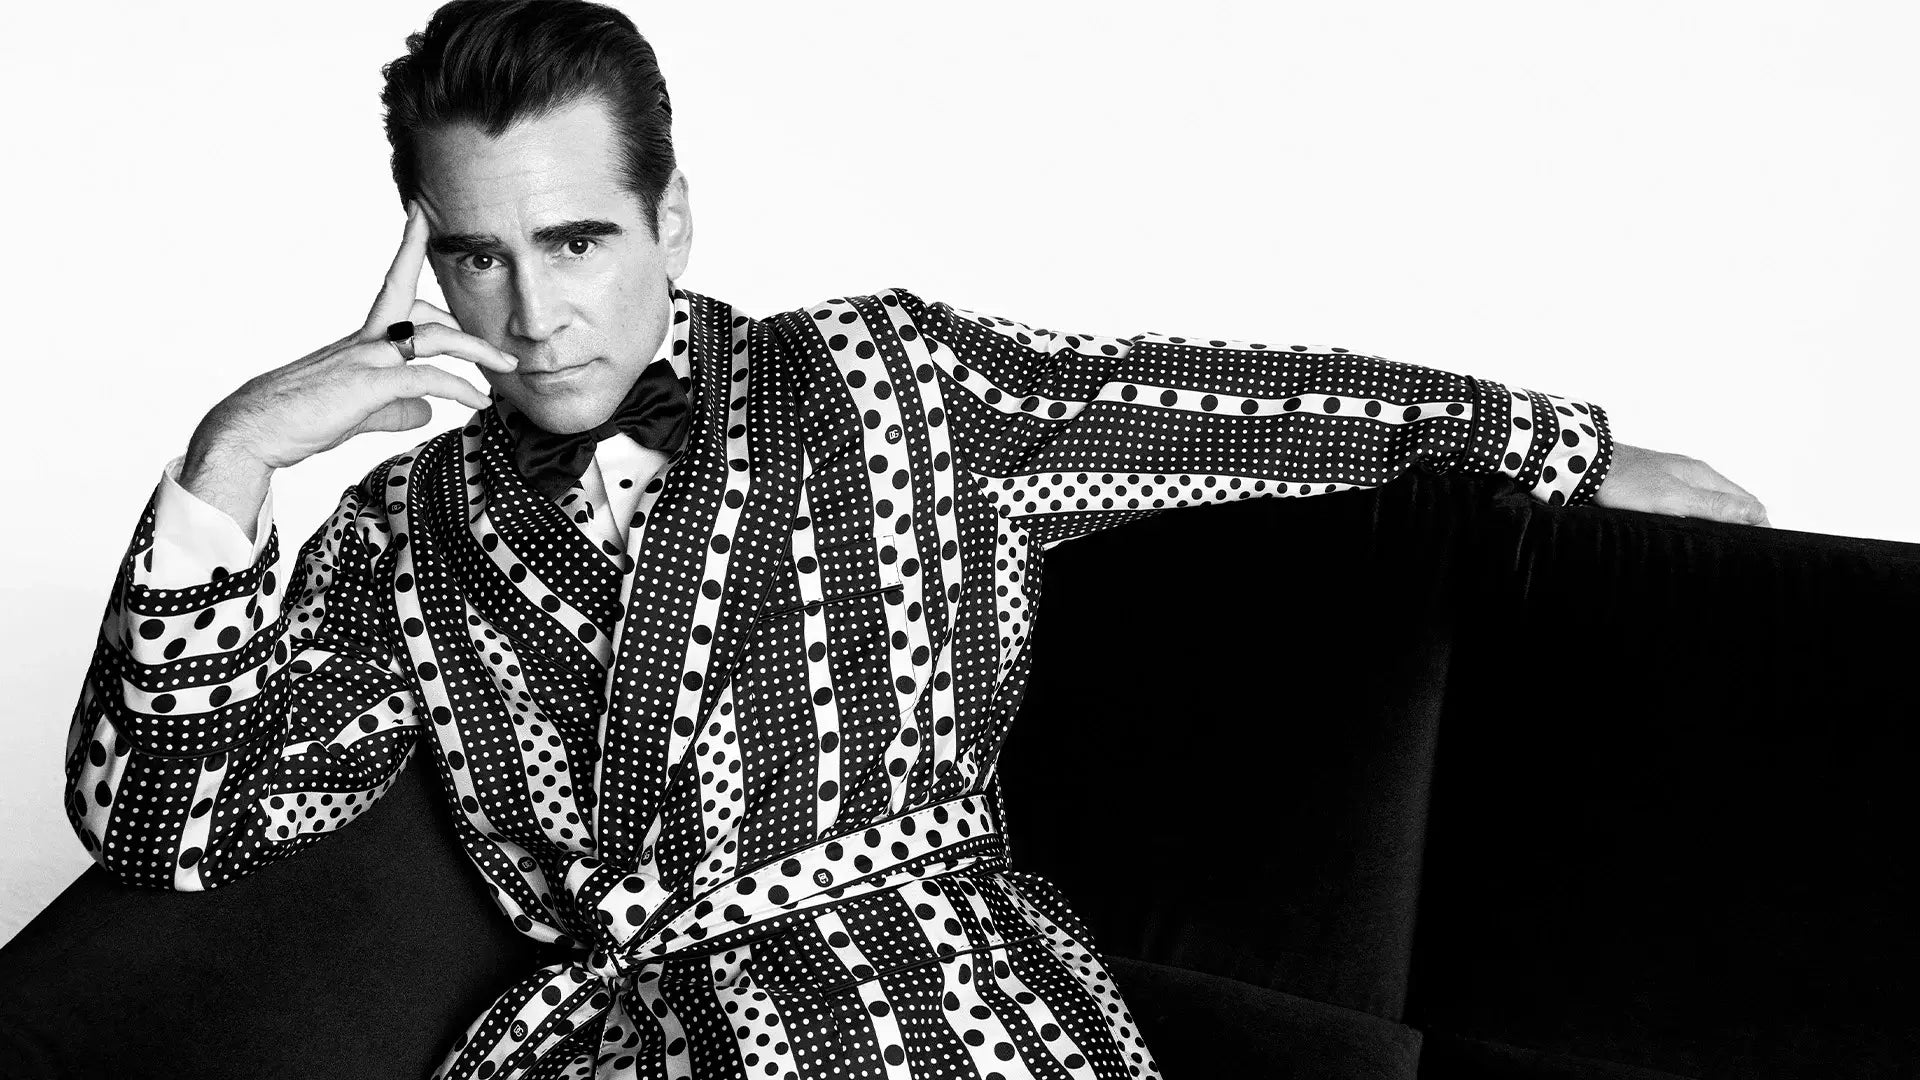 Colin Farrell has been unveiled as the ambassador for the latest Dolce&Gabbana